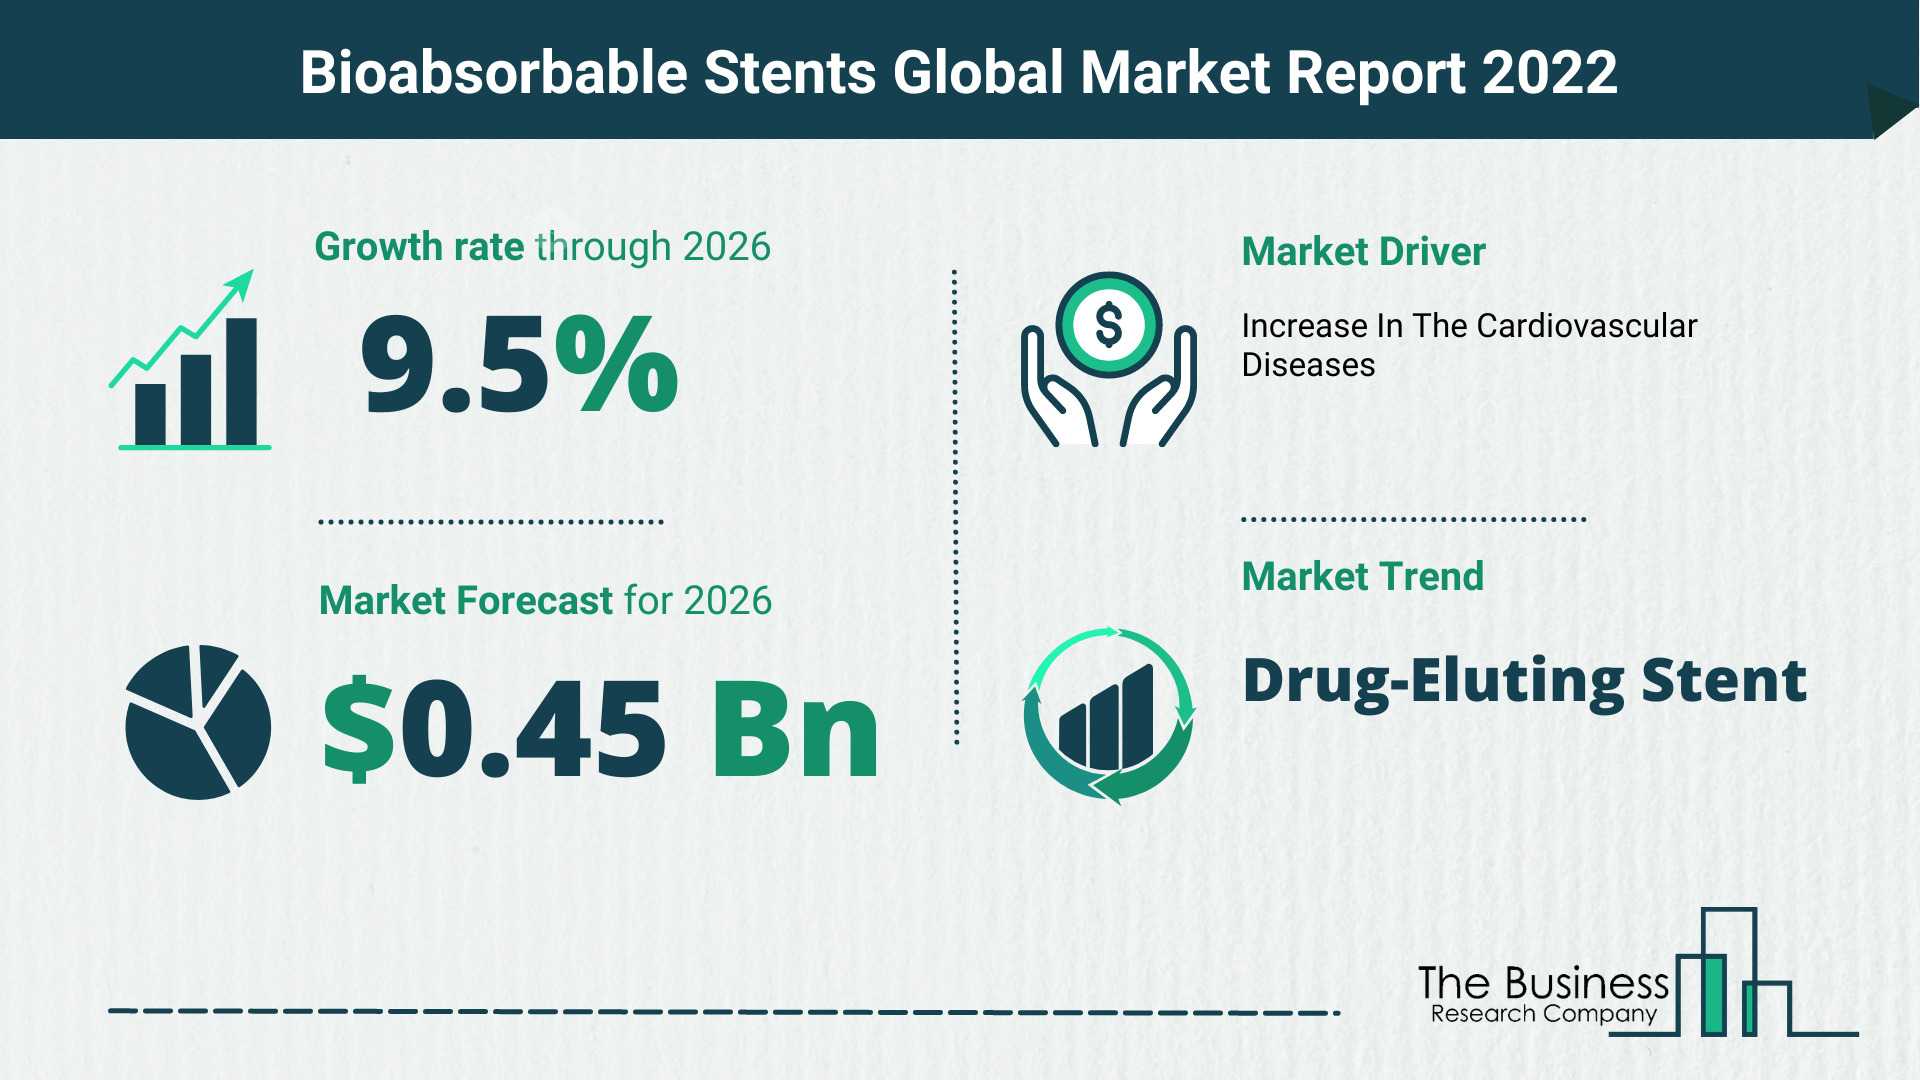 How Will The Bioabsorbable Stents Market Grow In 2022?